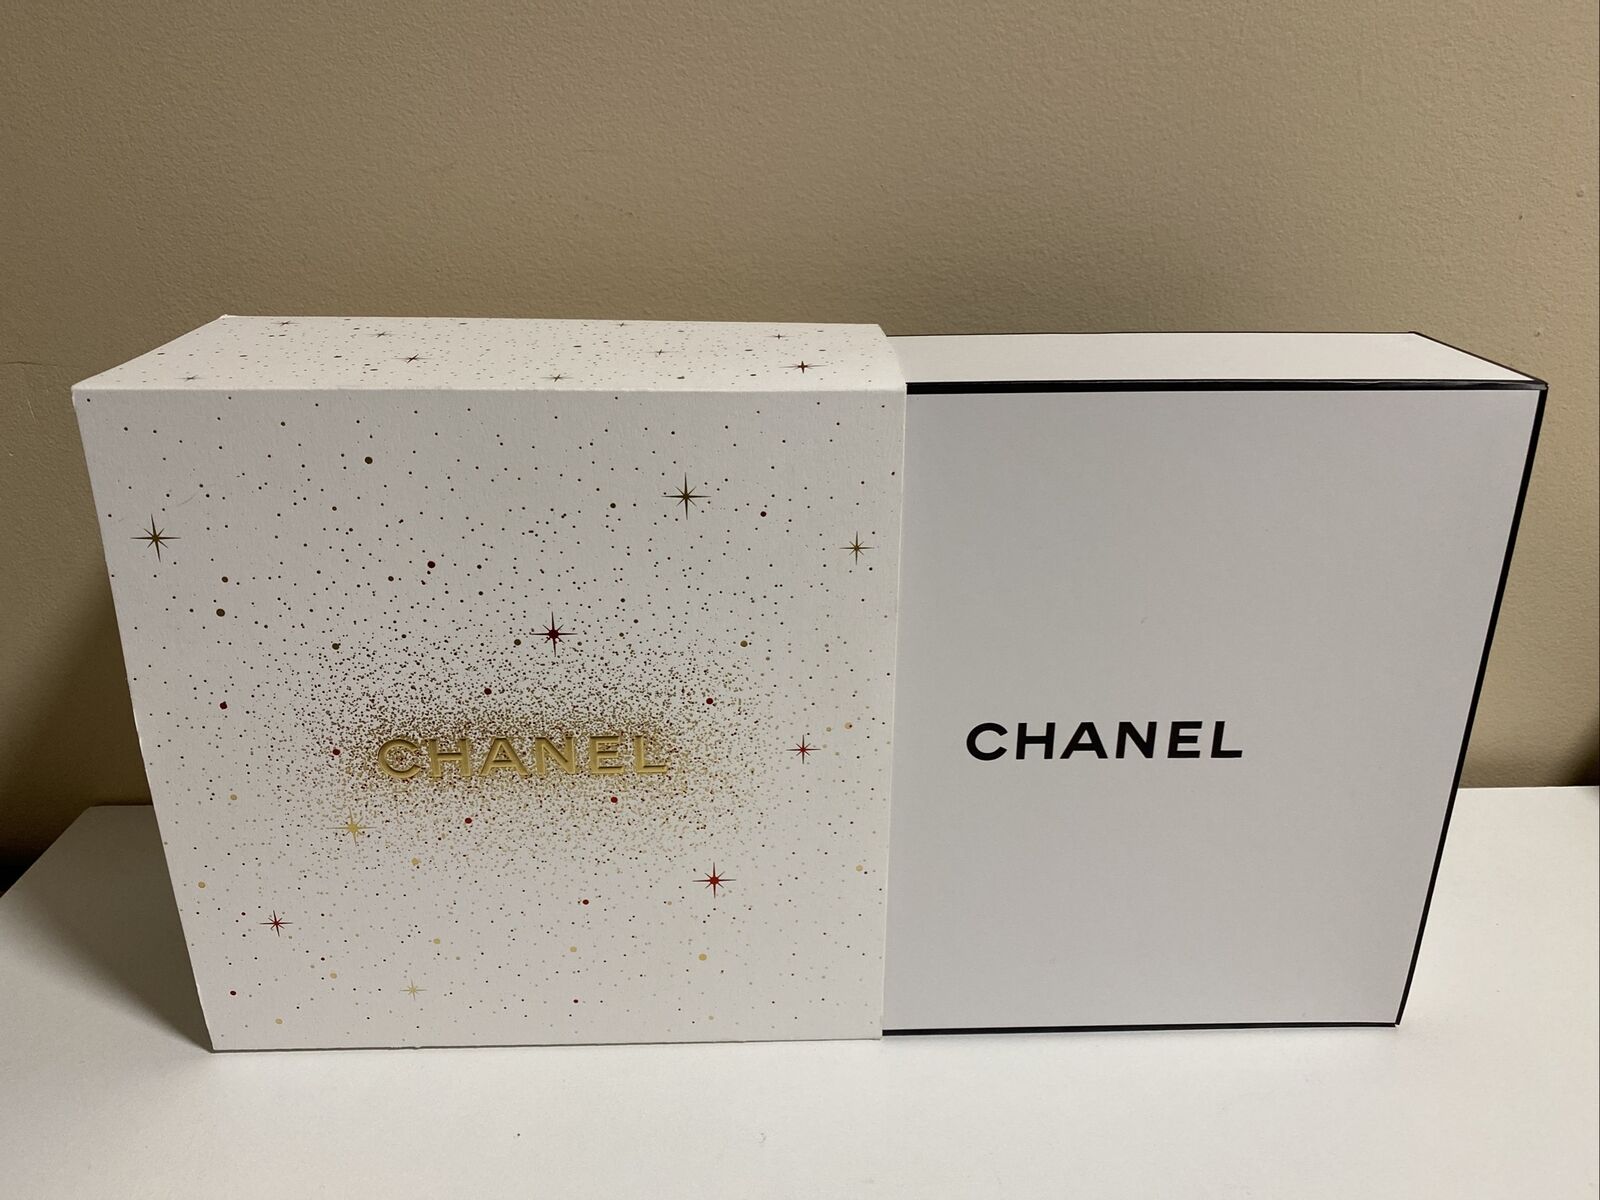 CHANEL Large Gift Box Authentic NEW, 9 x 9 x 4